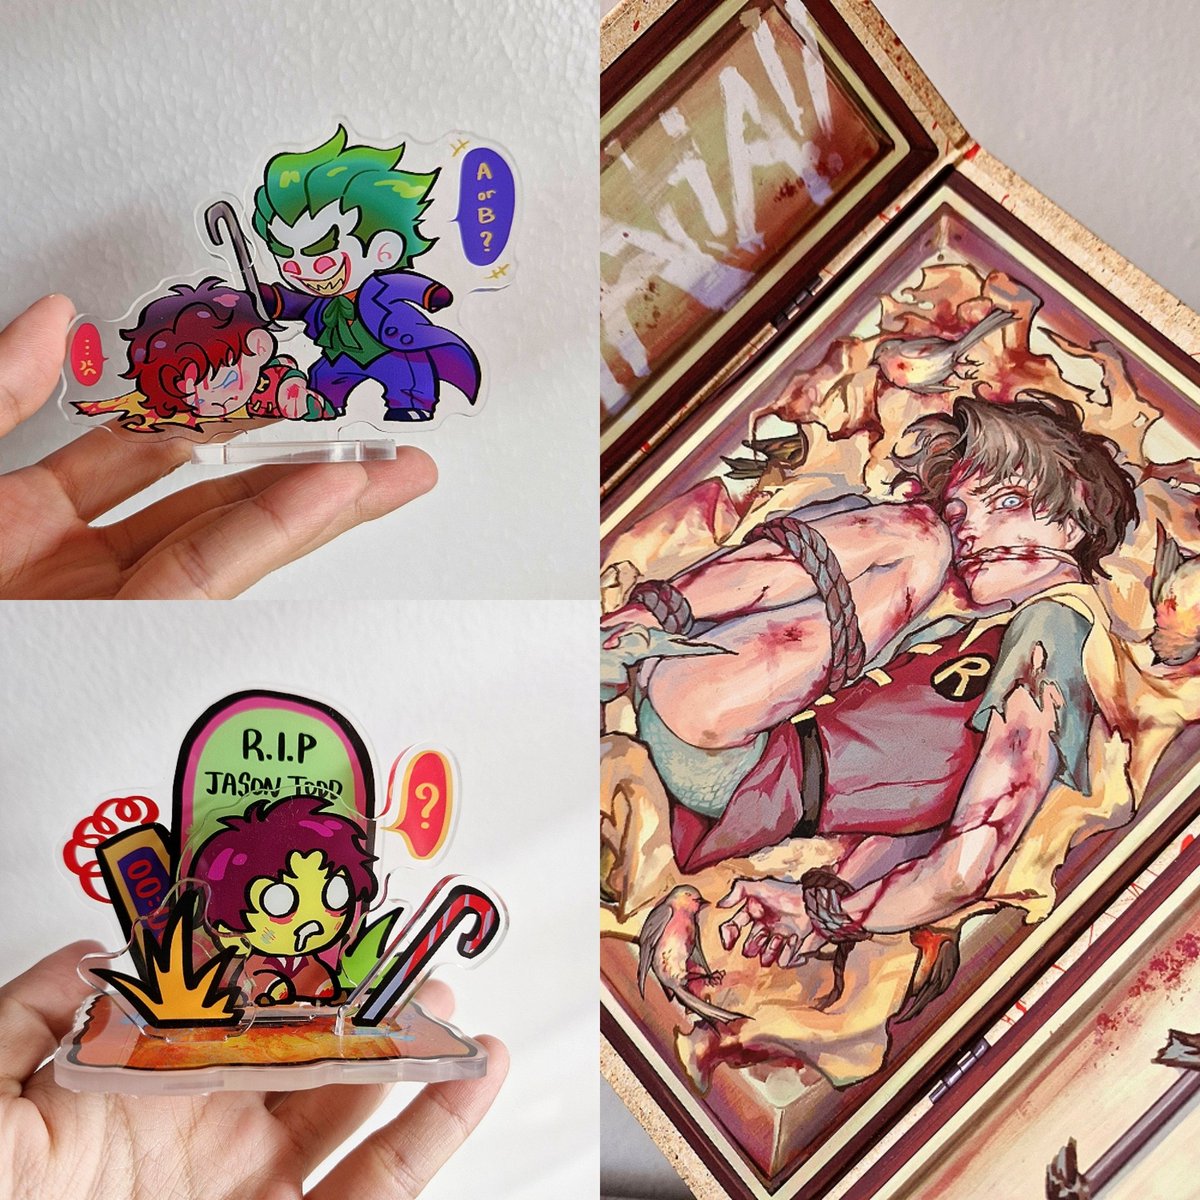 😇Alright finally done editing all the pic and my Etsy, here's my new merch!
✨KnightTerrors Artprint A5 set
✨Chibi Standee(you can change their clothes❤️
✨Festival Artprint Set
✨Robin Irogami
✨KnockKnock Standee & ZombieJay Standee
etsy.com/shop/TYTTHAM